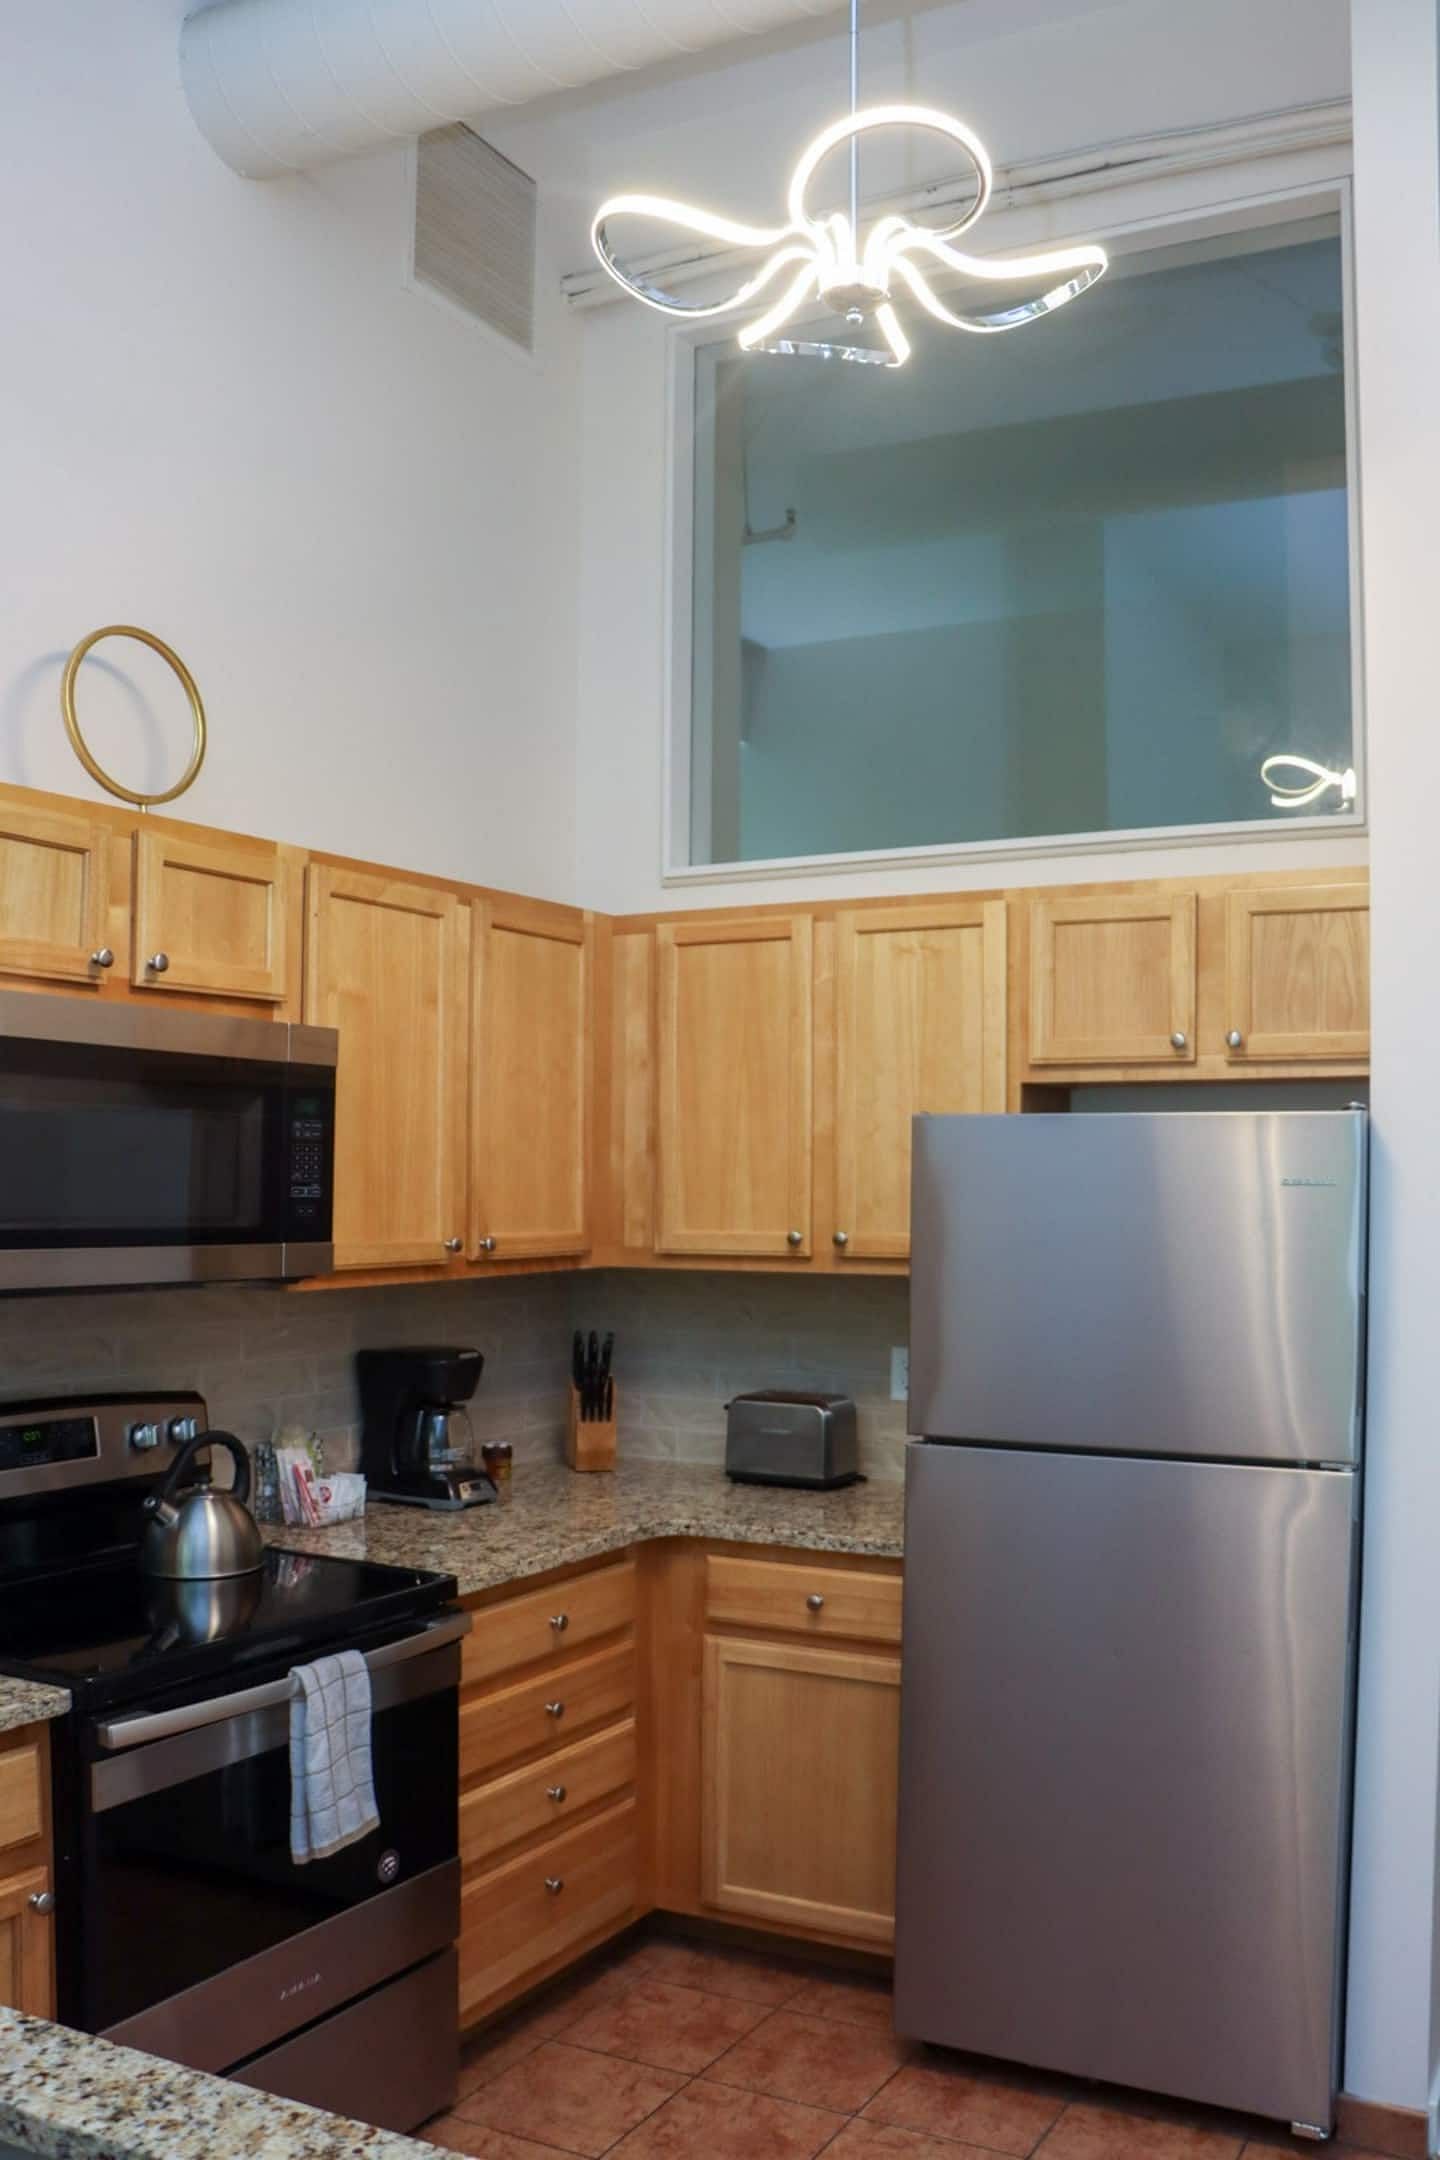 JWguest Rental unit at Indianapolis, Indiana | 360 Terrace View + King Beds + WD | Jwbnb no brobnb 11